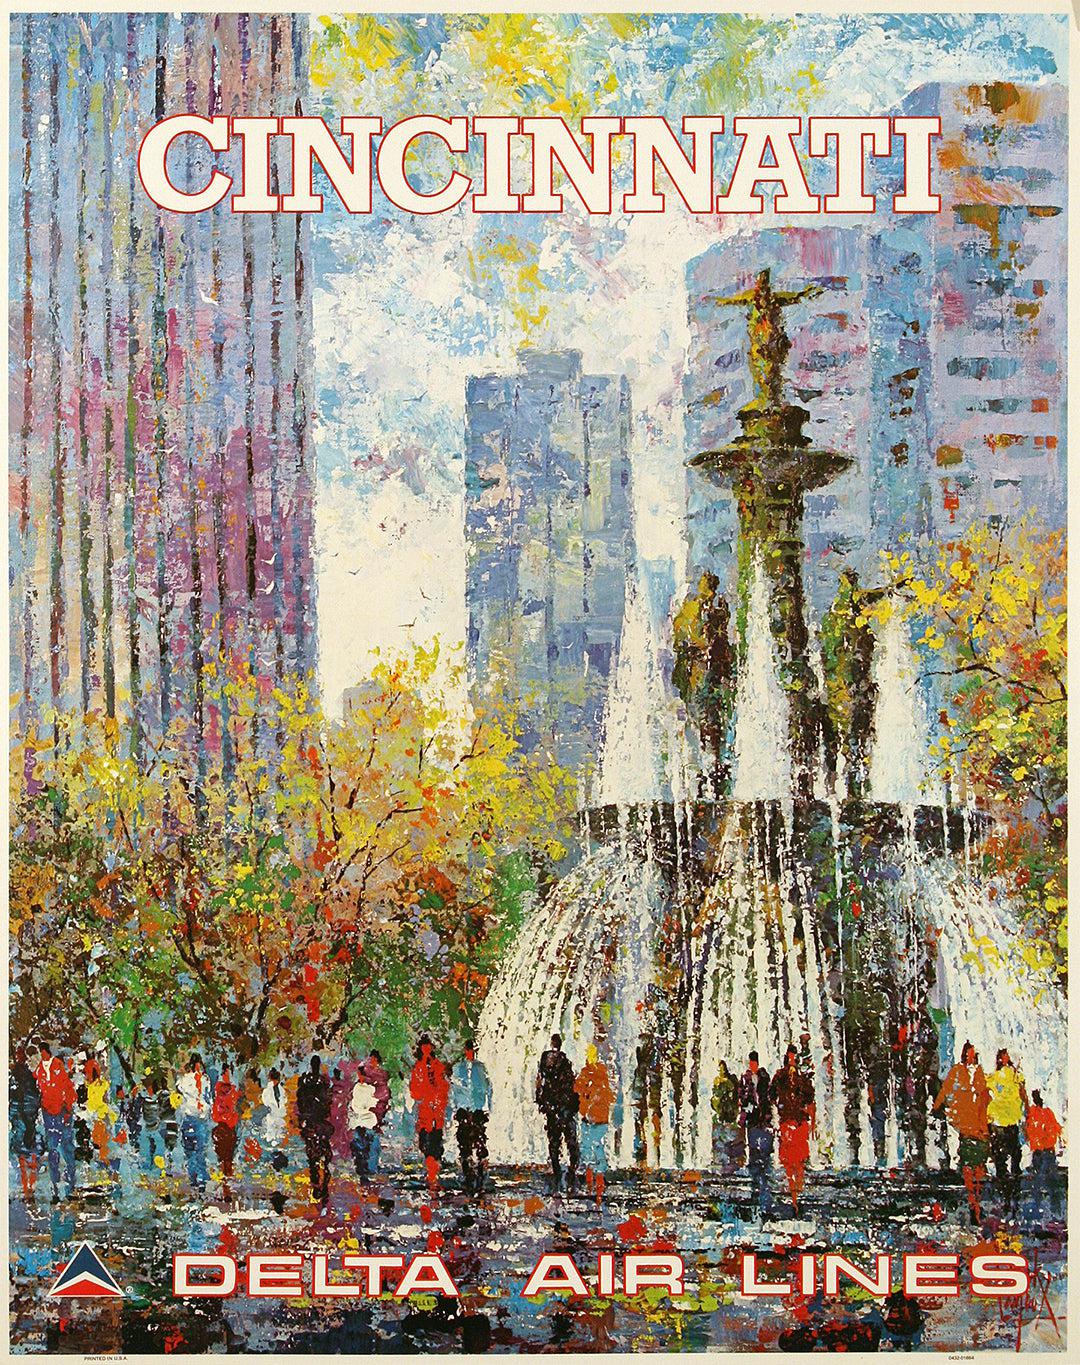 0's Delta Air Lines Poster for Cincinnati Ohio by Jack Laycox